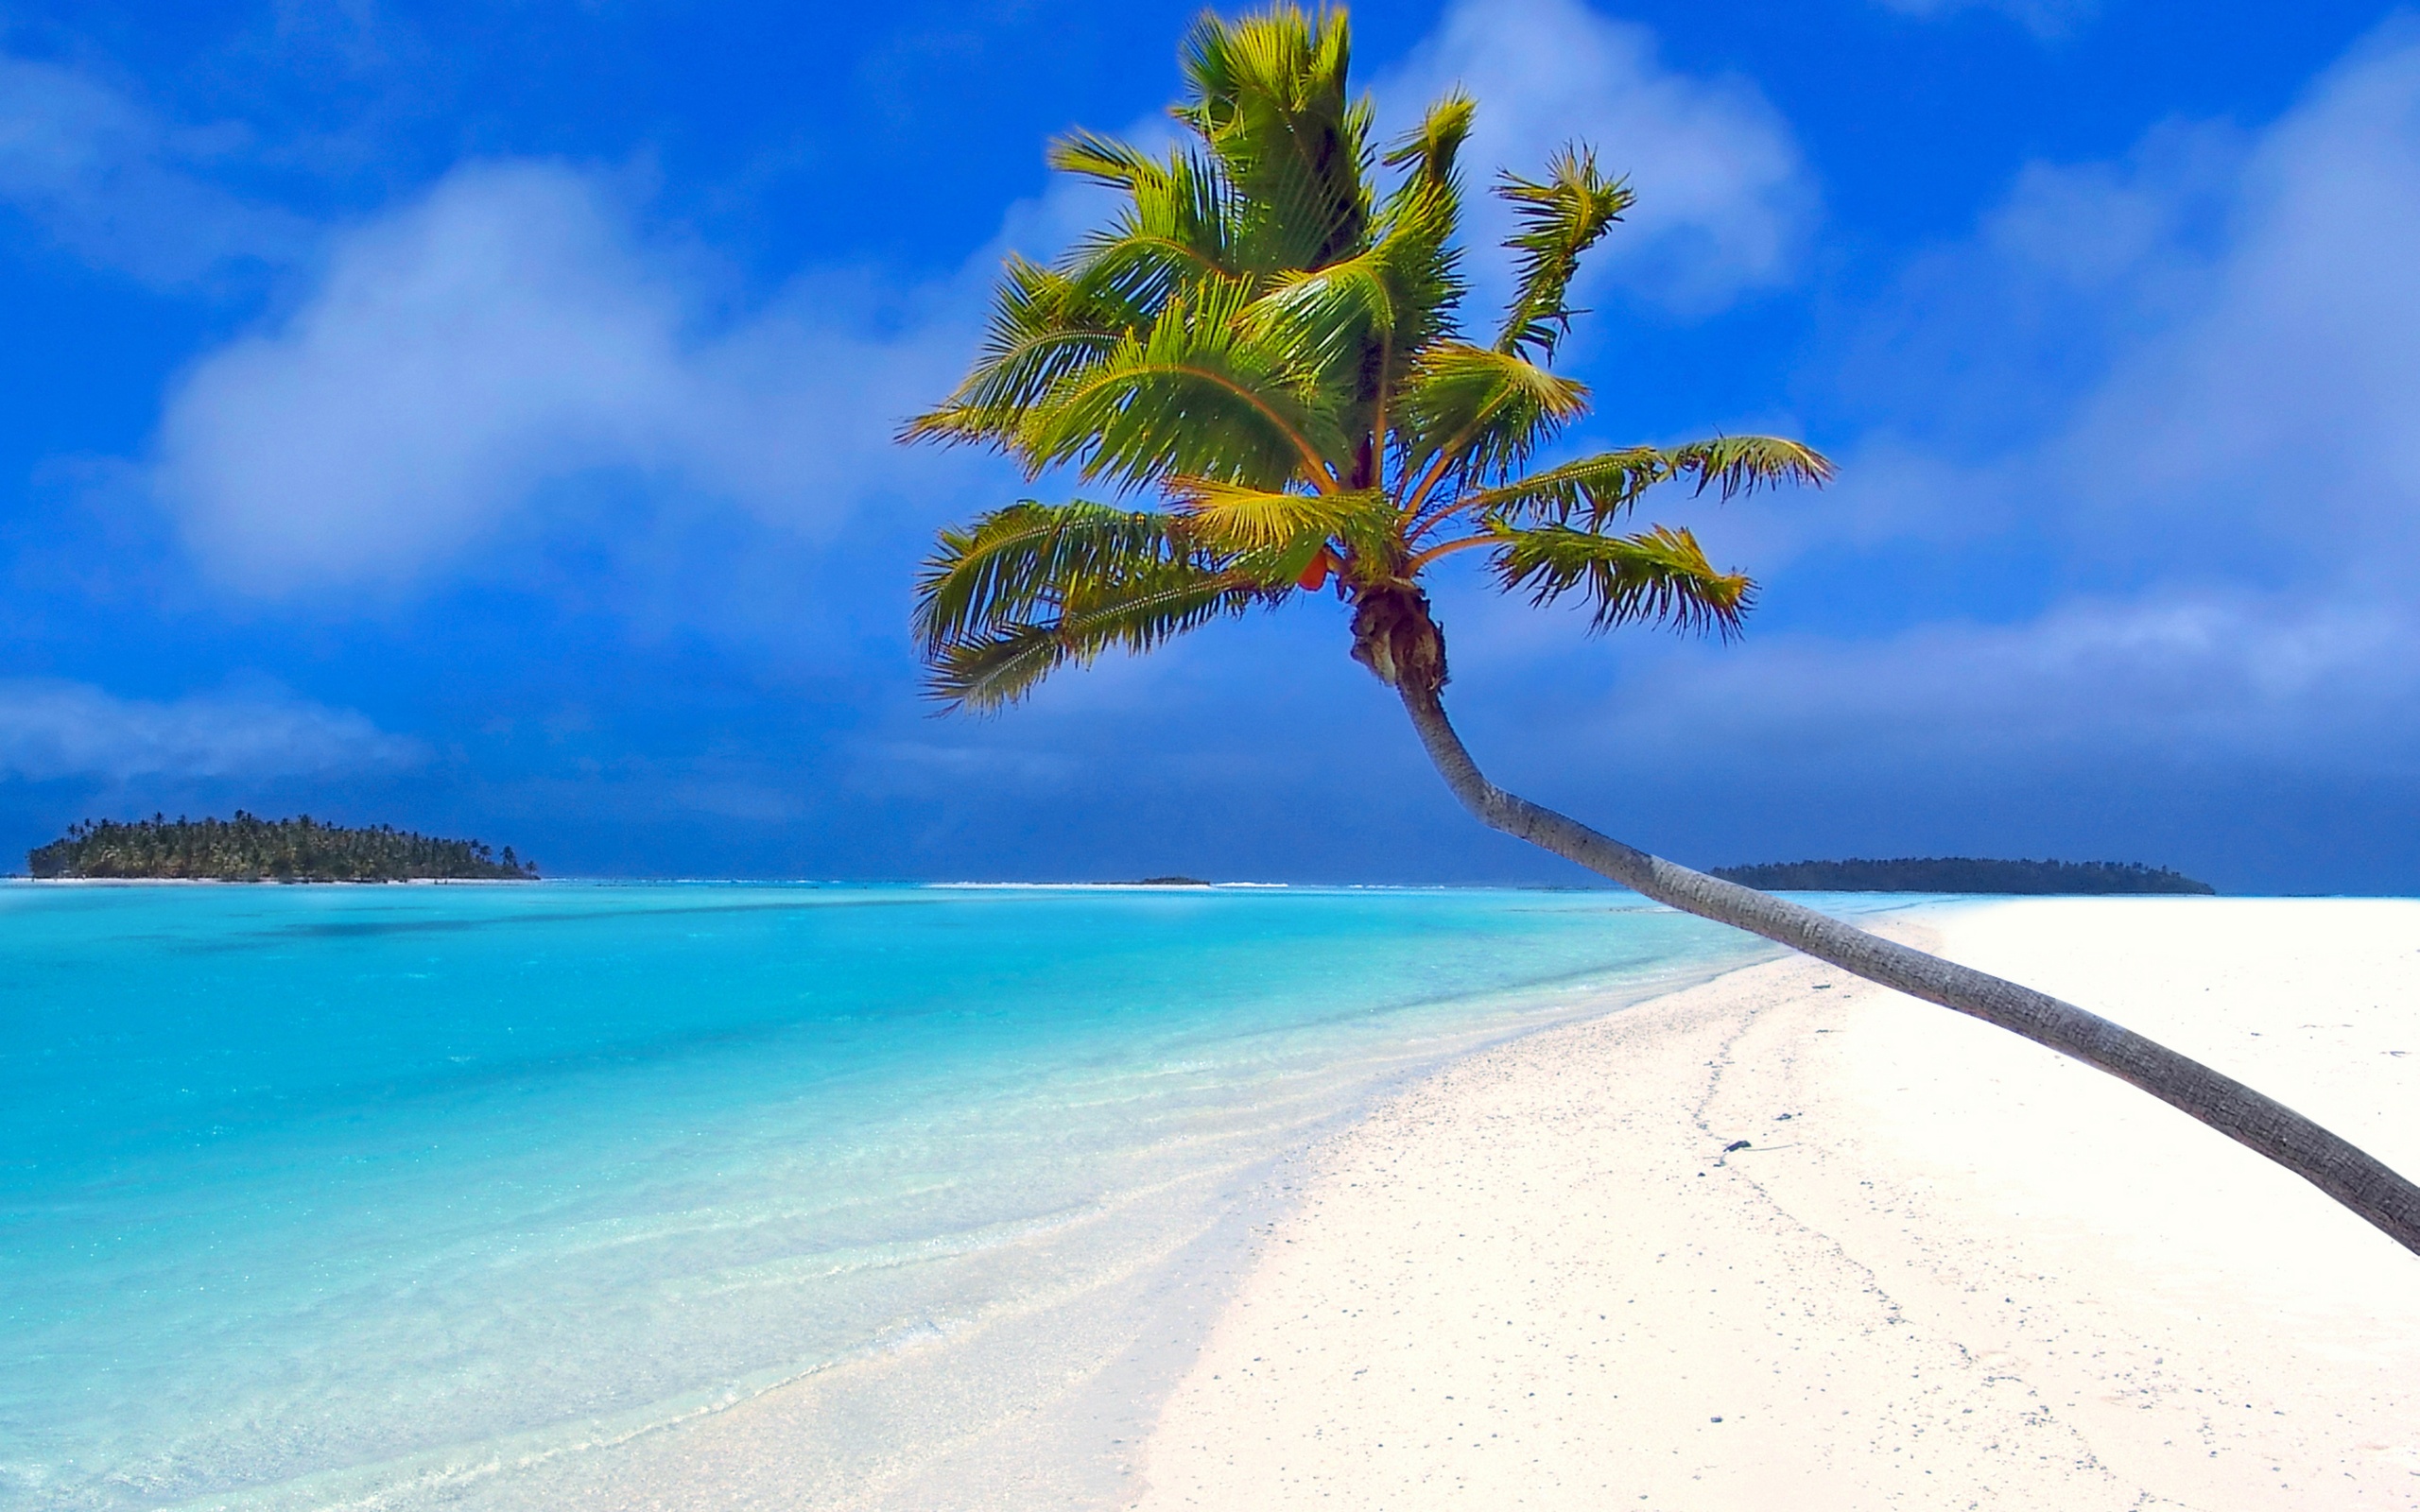 2560x1600 Isolated palm tree desktop PC and Mac wallpaper 2560x1600